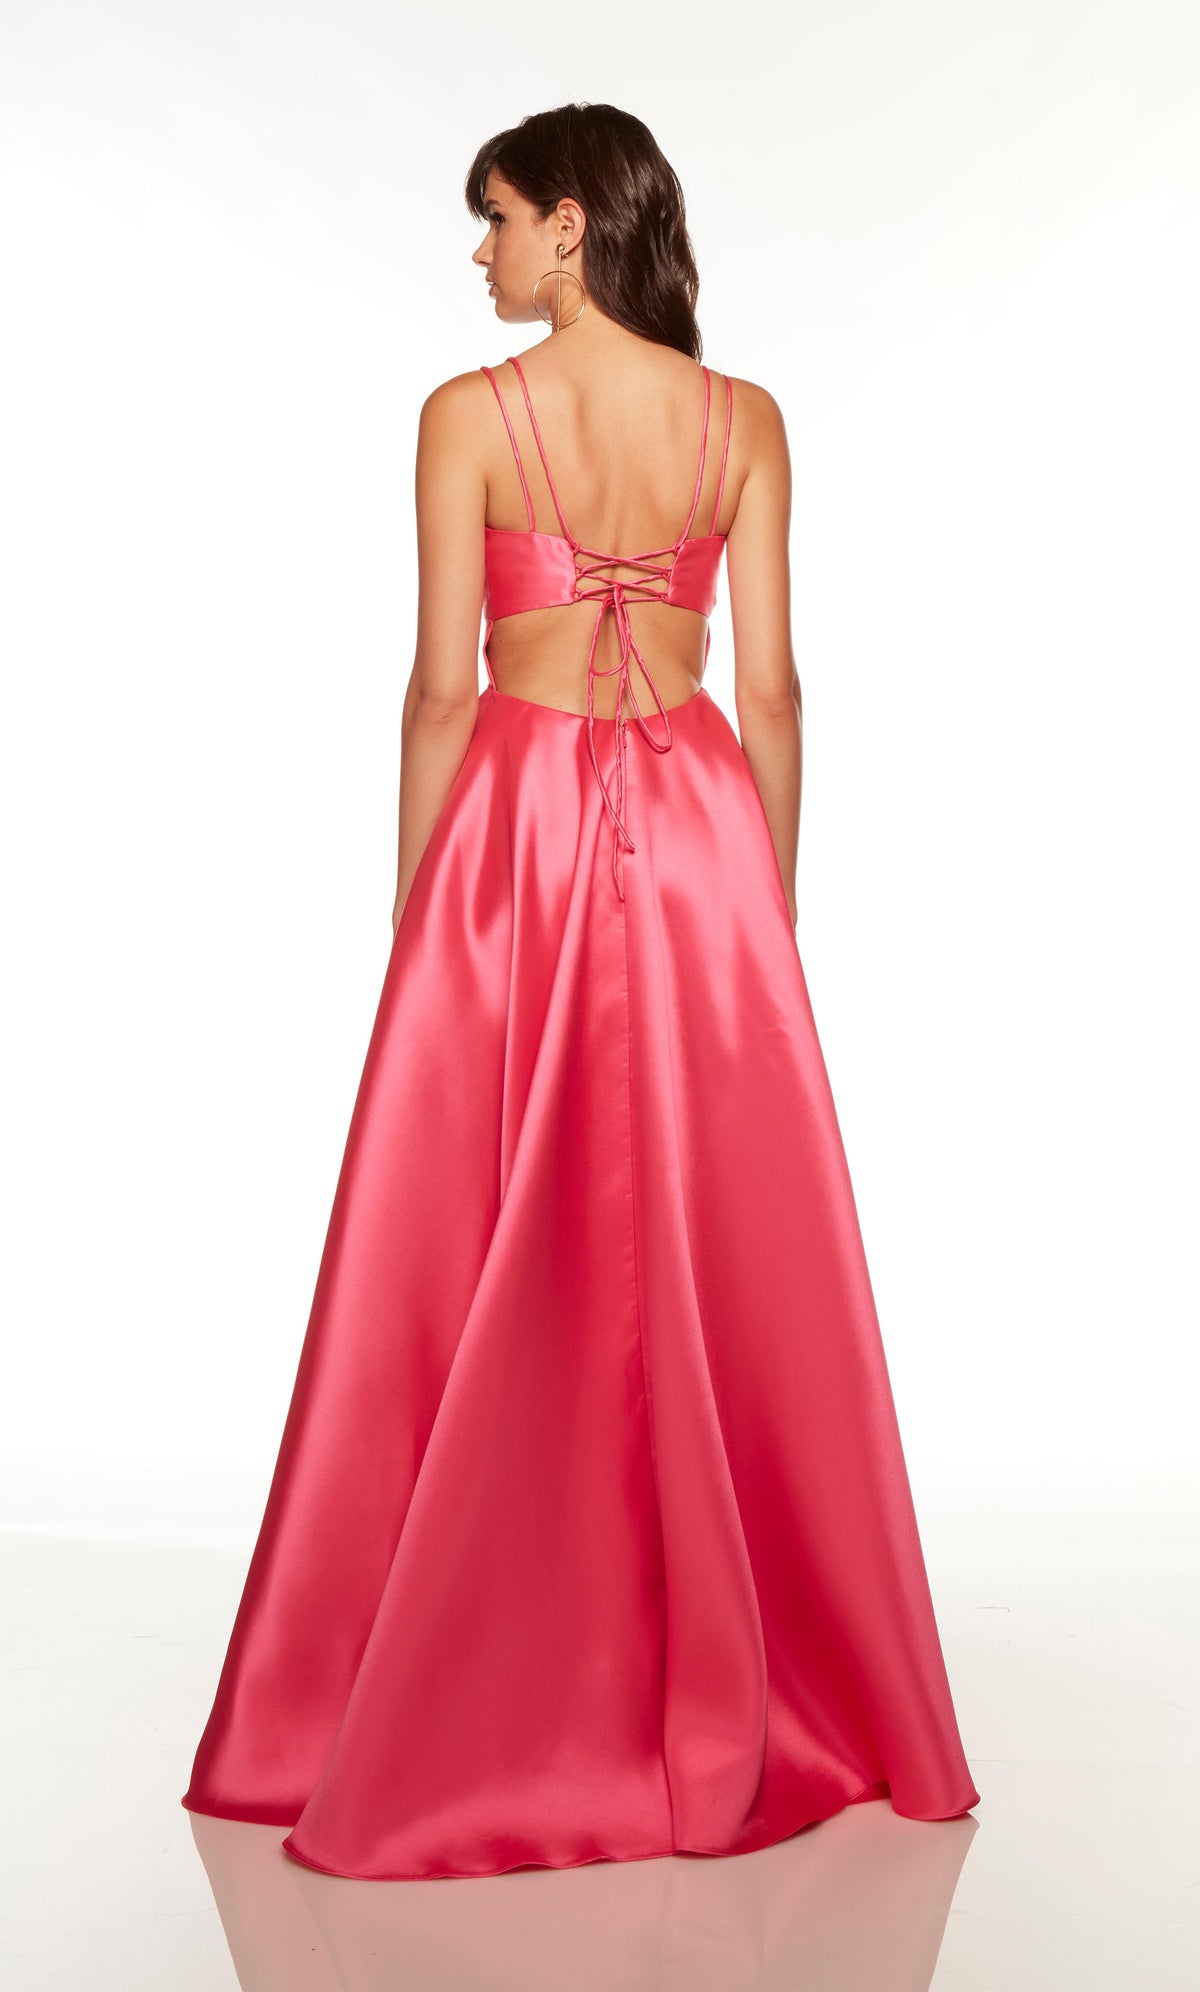 Hot long prom dress with a lace-up back, pockets, and train.